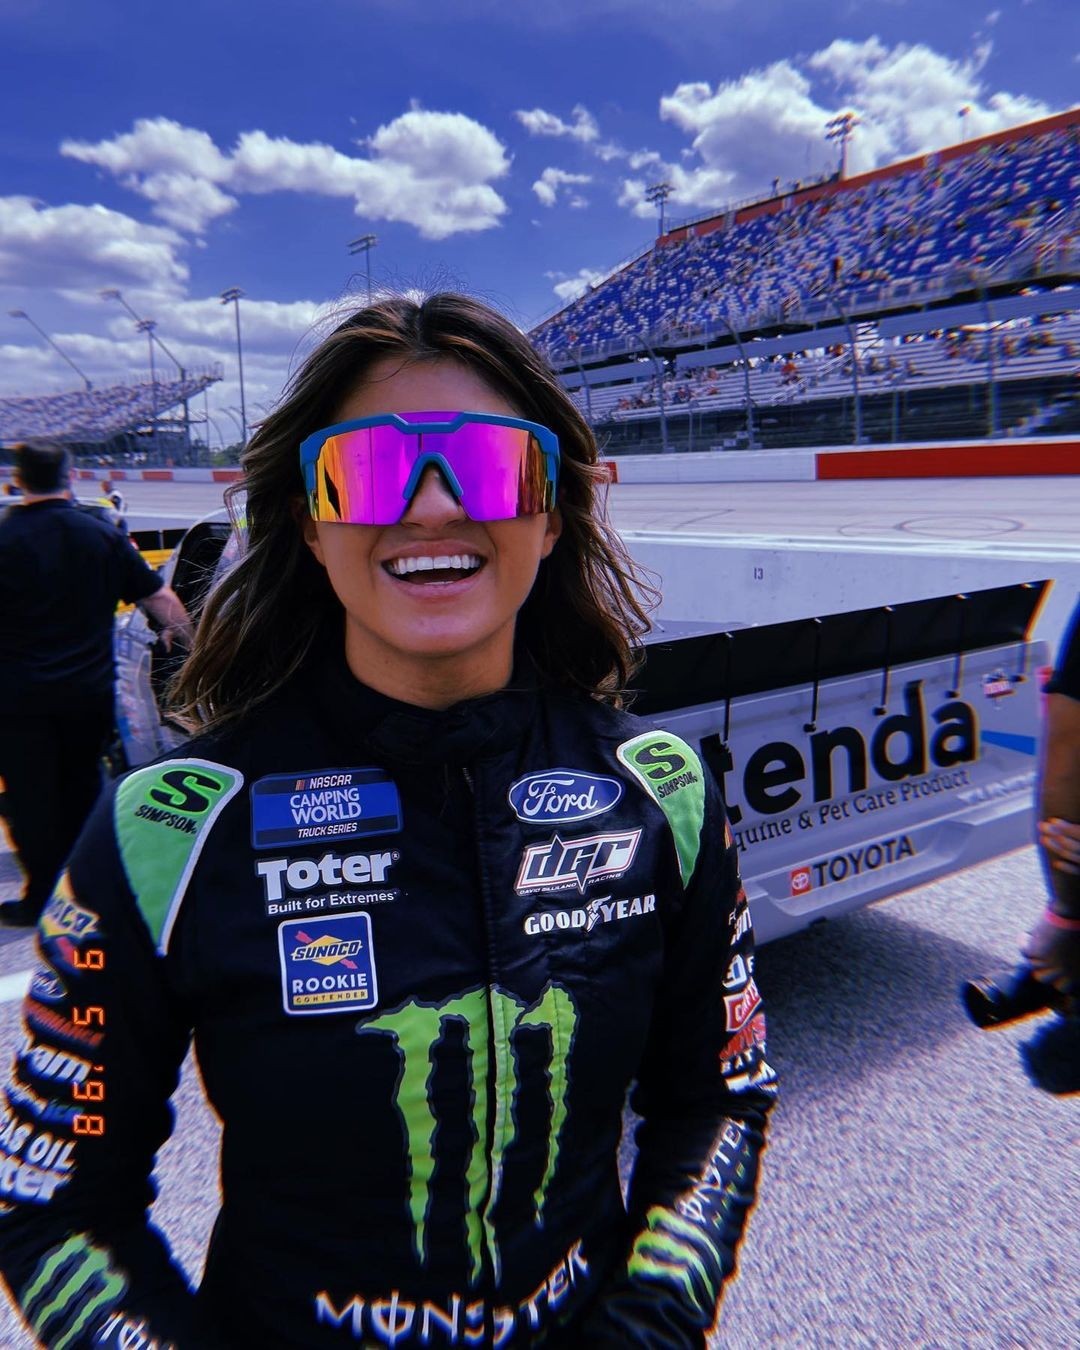 NASCAR Rising Star Hailie Deegan Shows Off Her Ford Truck, Ahead of Upcomin...